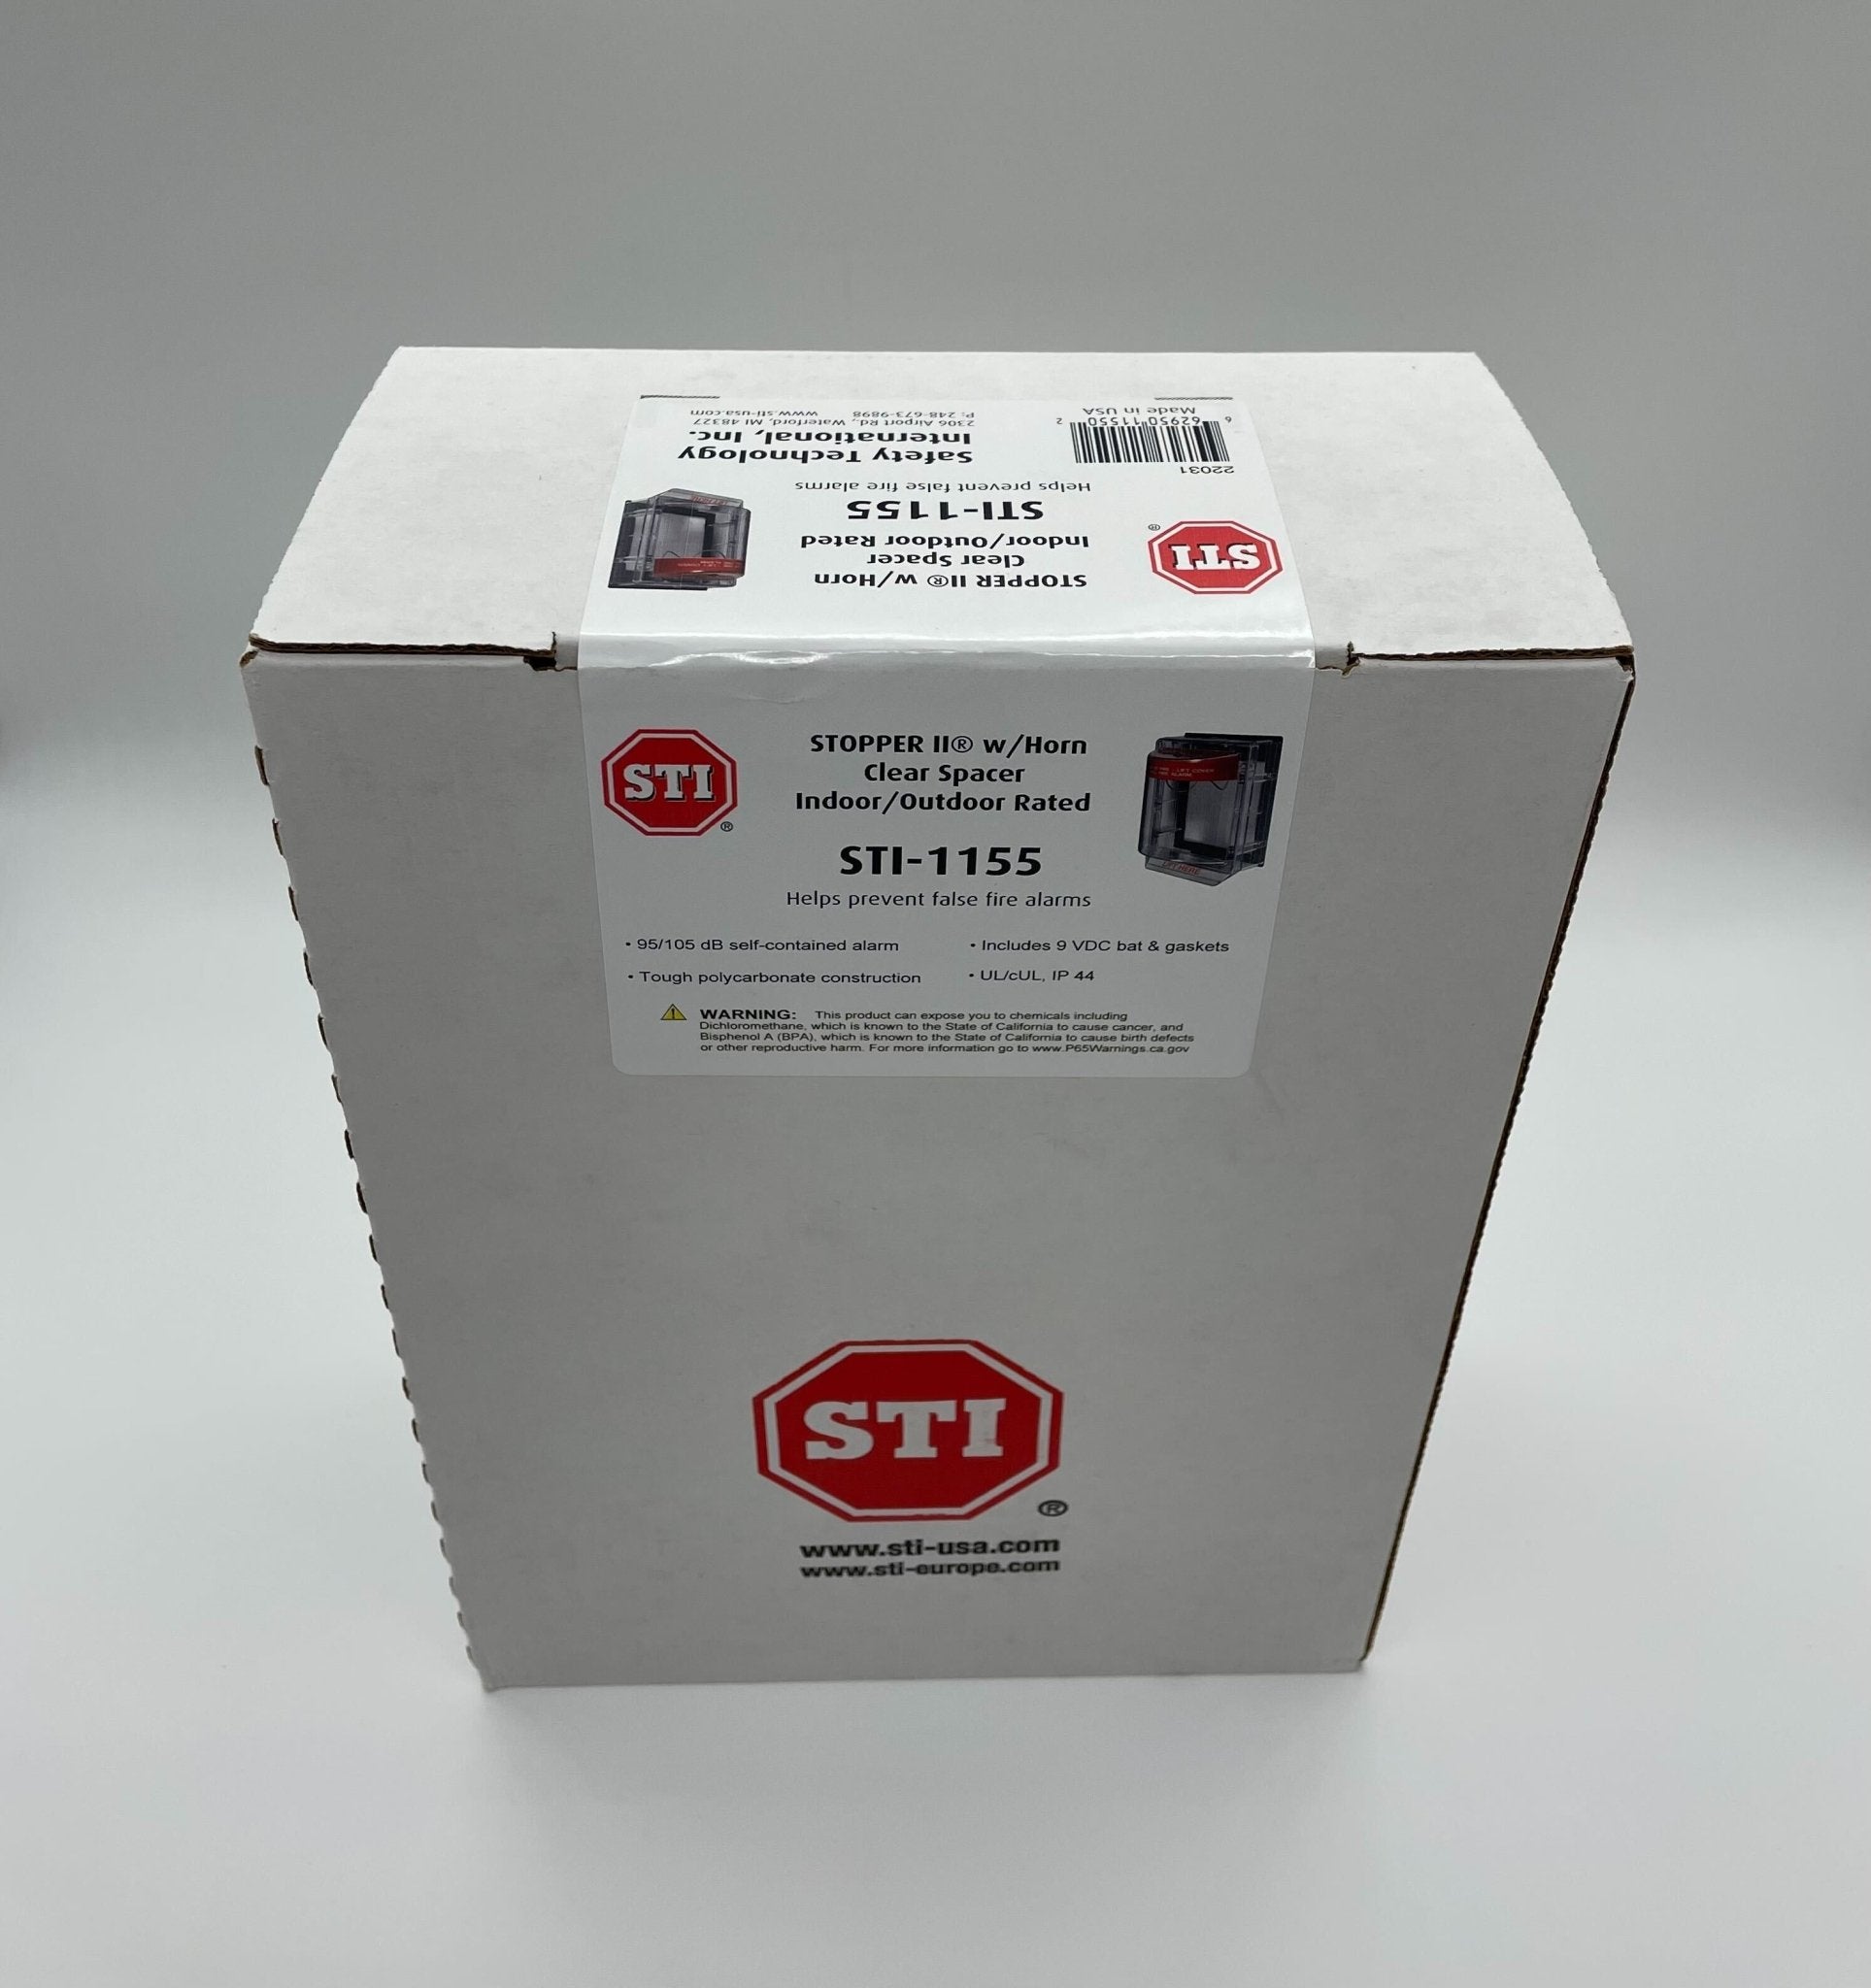 STI-1155 Stopper II with Horn and Spacer (Indoor/Outdoor Rated), Fire Label - The Fire Alarm Supplier